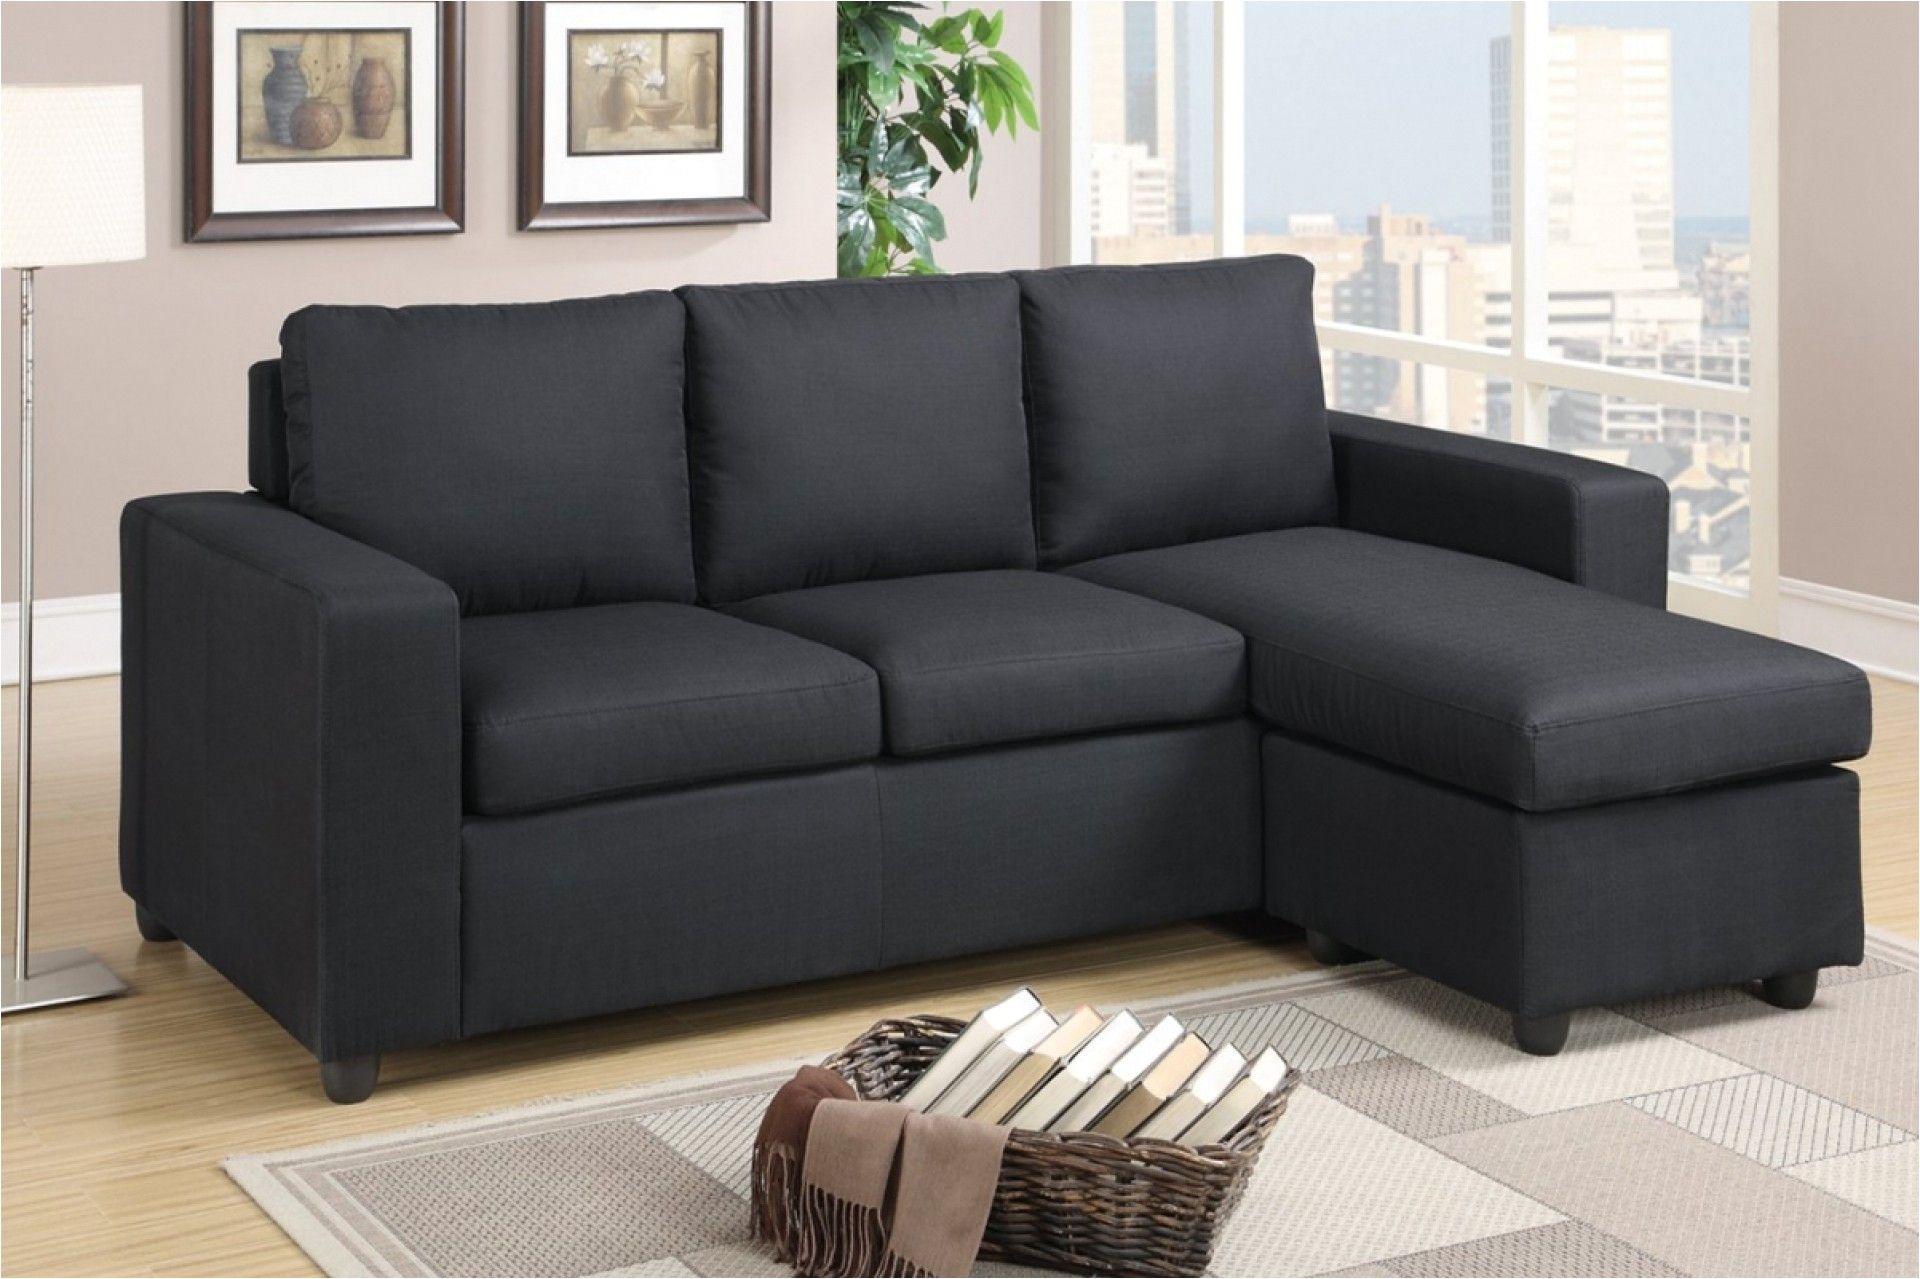 What Is A Reversible Chaise Sofa – Sofa Design Ideas In Egan Ii Cement Sofa Sectionals With Reversible Chaise (View 4 of 25)